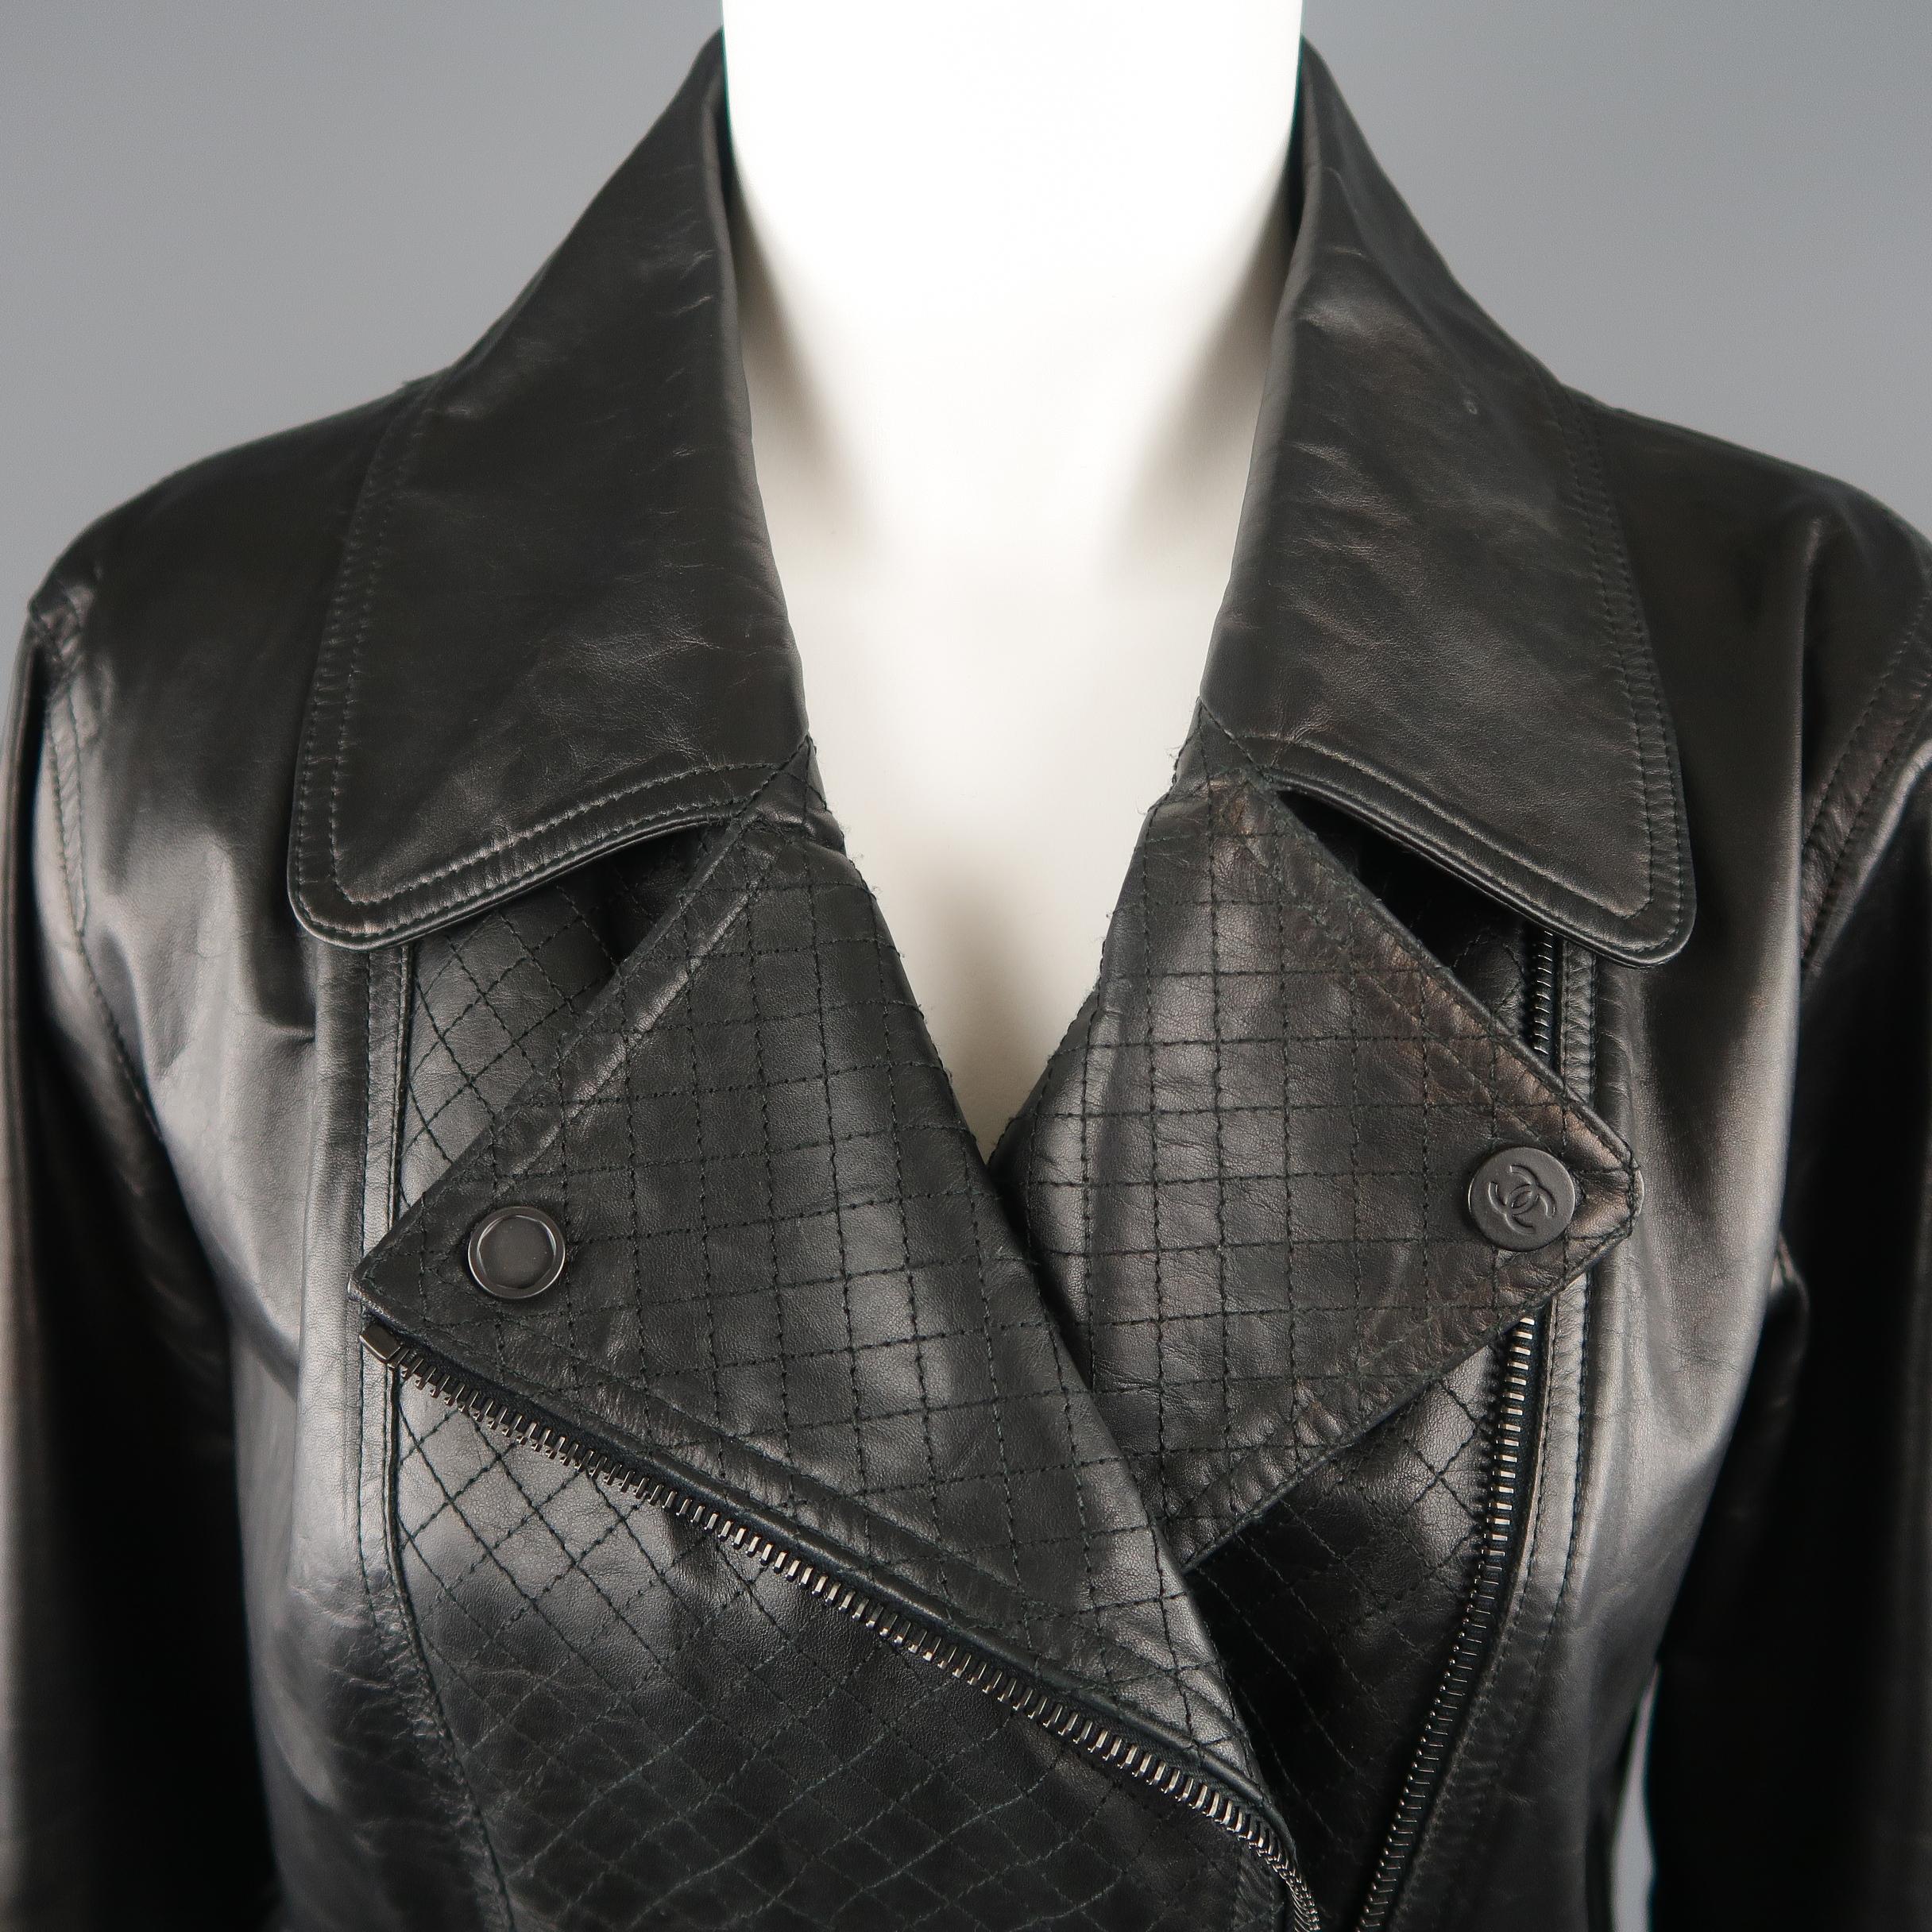 CHANEL biker jacket comes in smooth black leather with a classic collar, double breasted diagonal zip front, quilted leather panels, CC patch sleeve, and black zippers with CC emblem pulls. Minor Alteration / Tailored waist by Chanel. Measurements